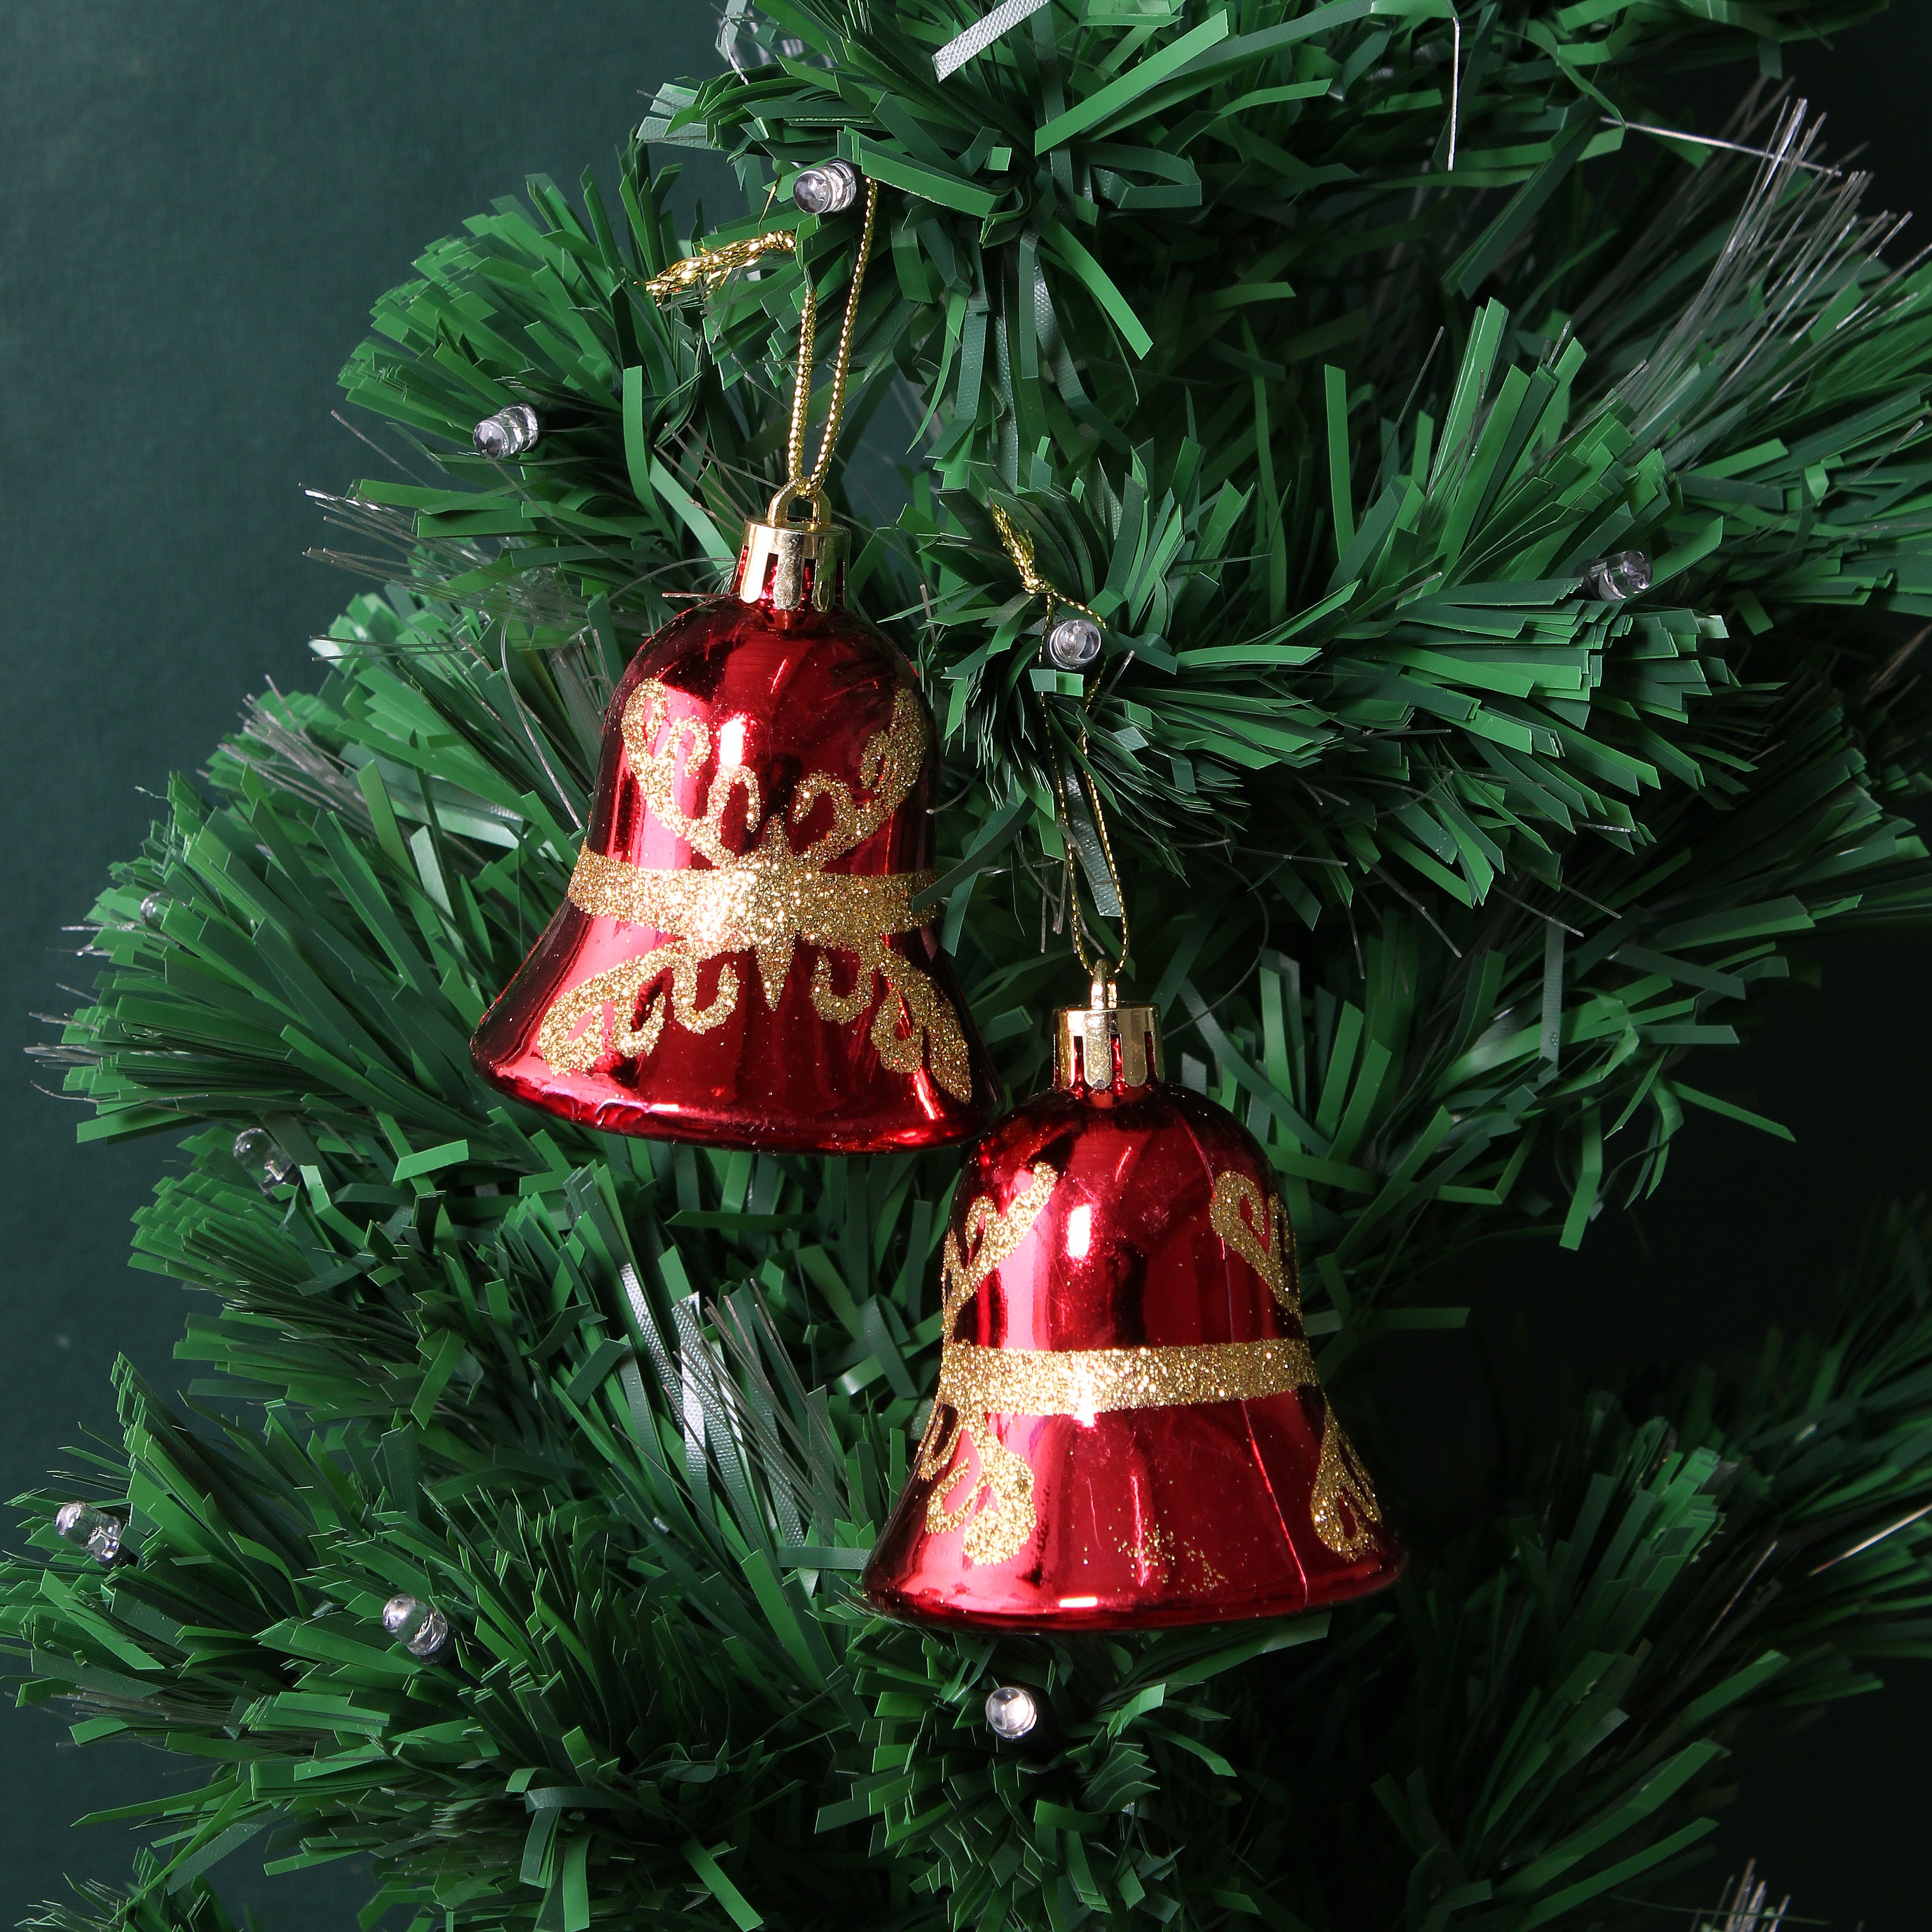 Christmas Tree Hanging Decoration Gold Glitter Printed Bells Red W25 X 7.5 X 5.5cm 6pc Acetate